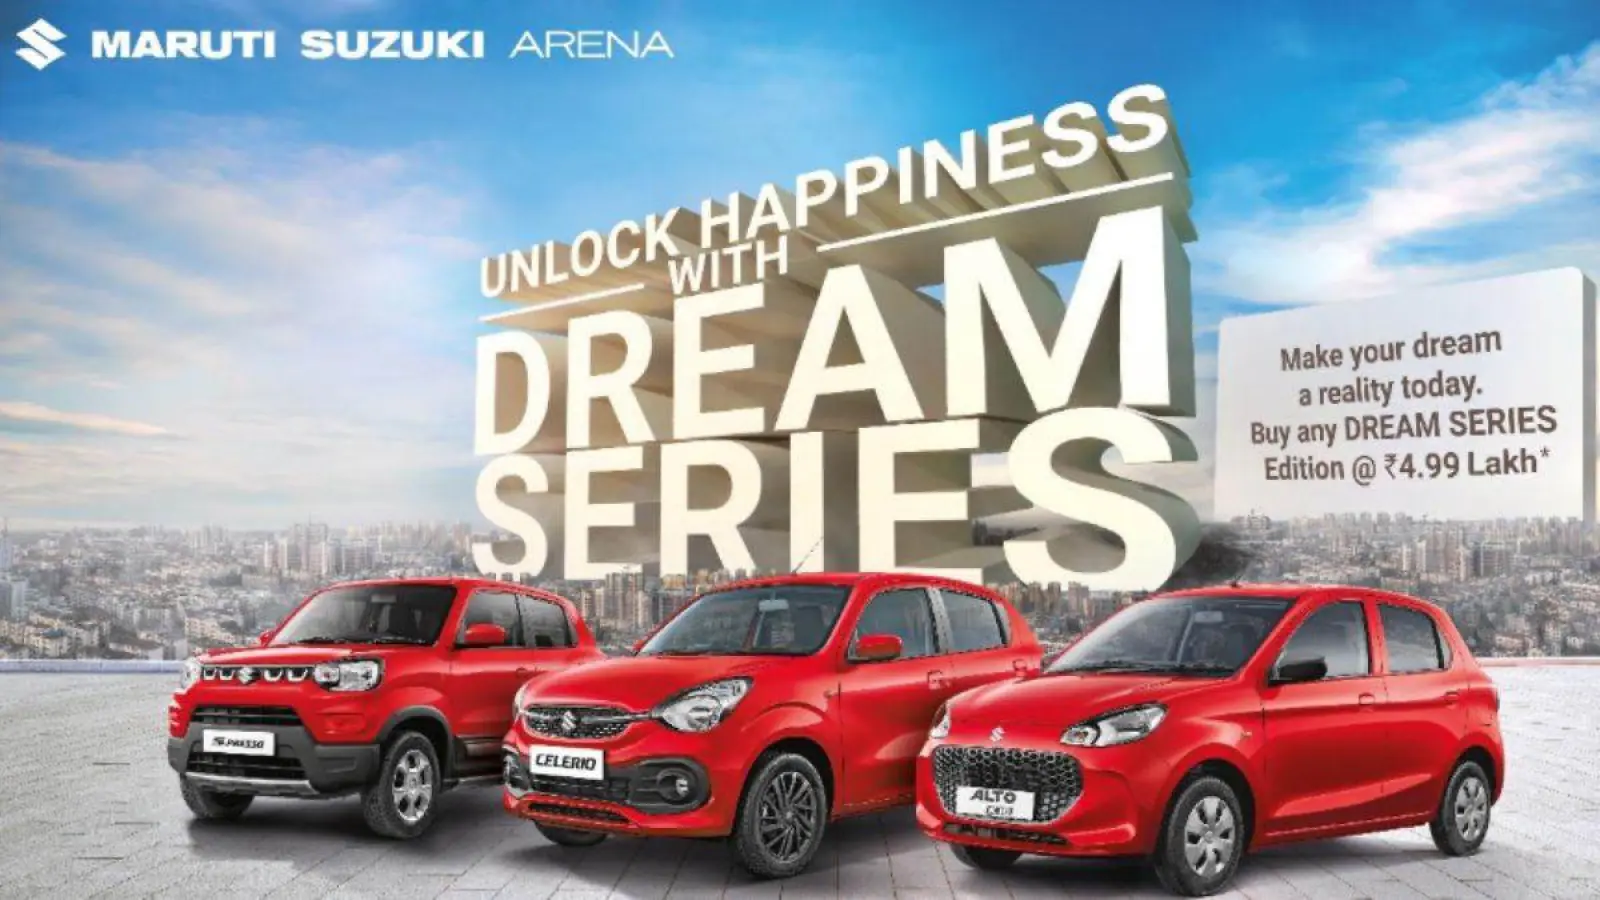 Maruti Suzuki launches Dream Series Edition; learn about the features